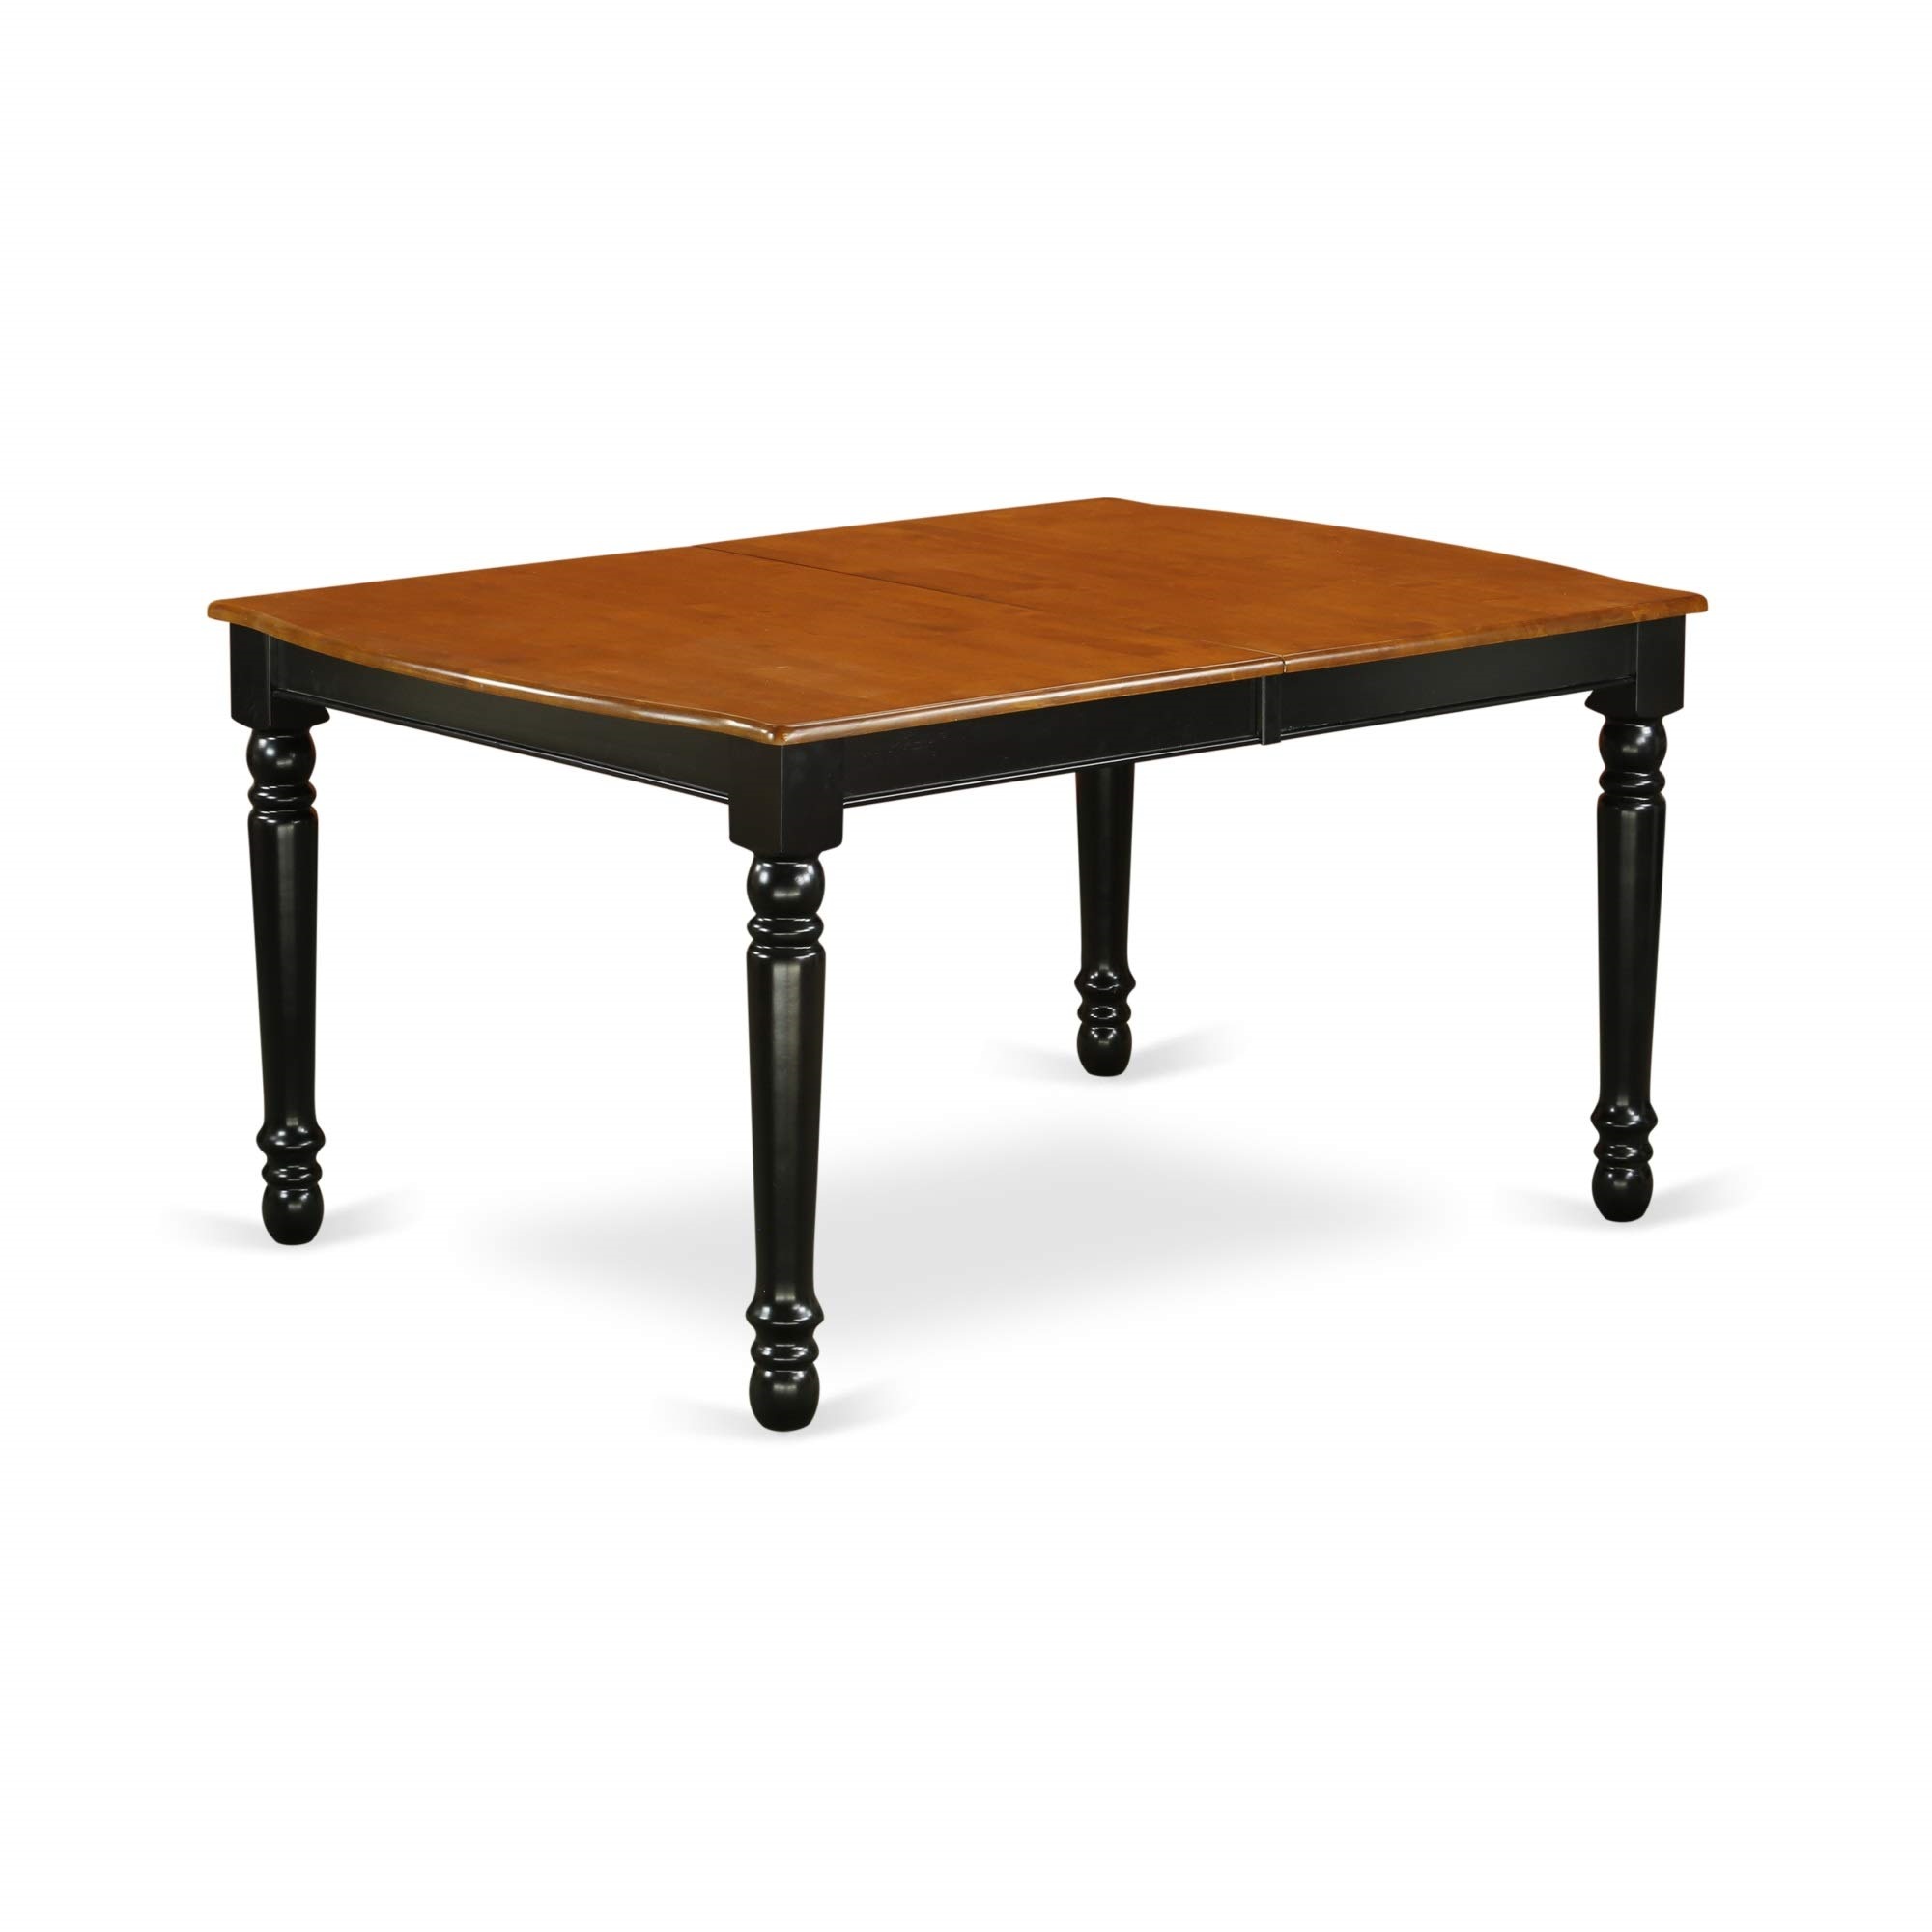 East West Furniture DOT-BCH-T Dover Dining Room table with 18" Butterfly Leaf -Black and Cherry Finish.